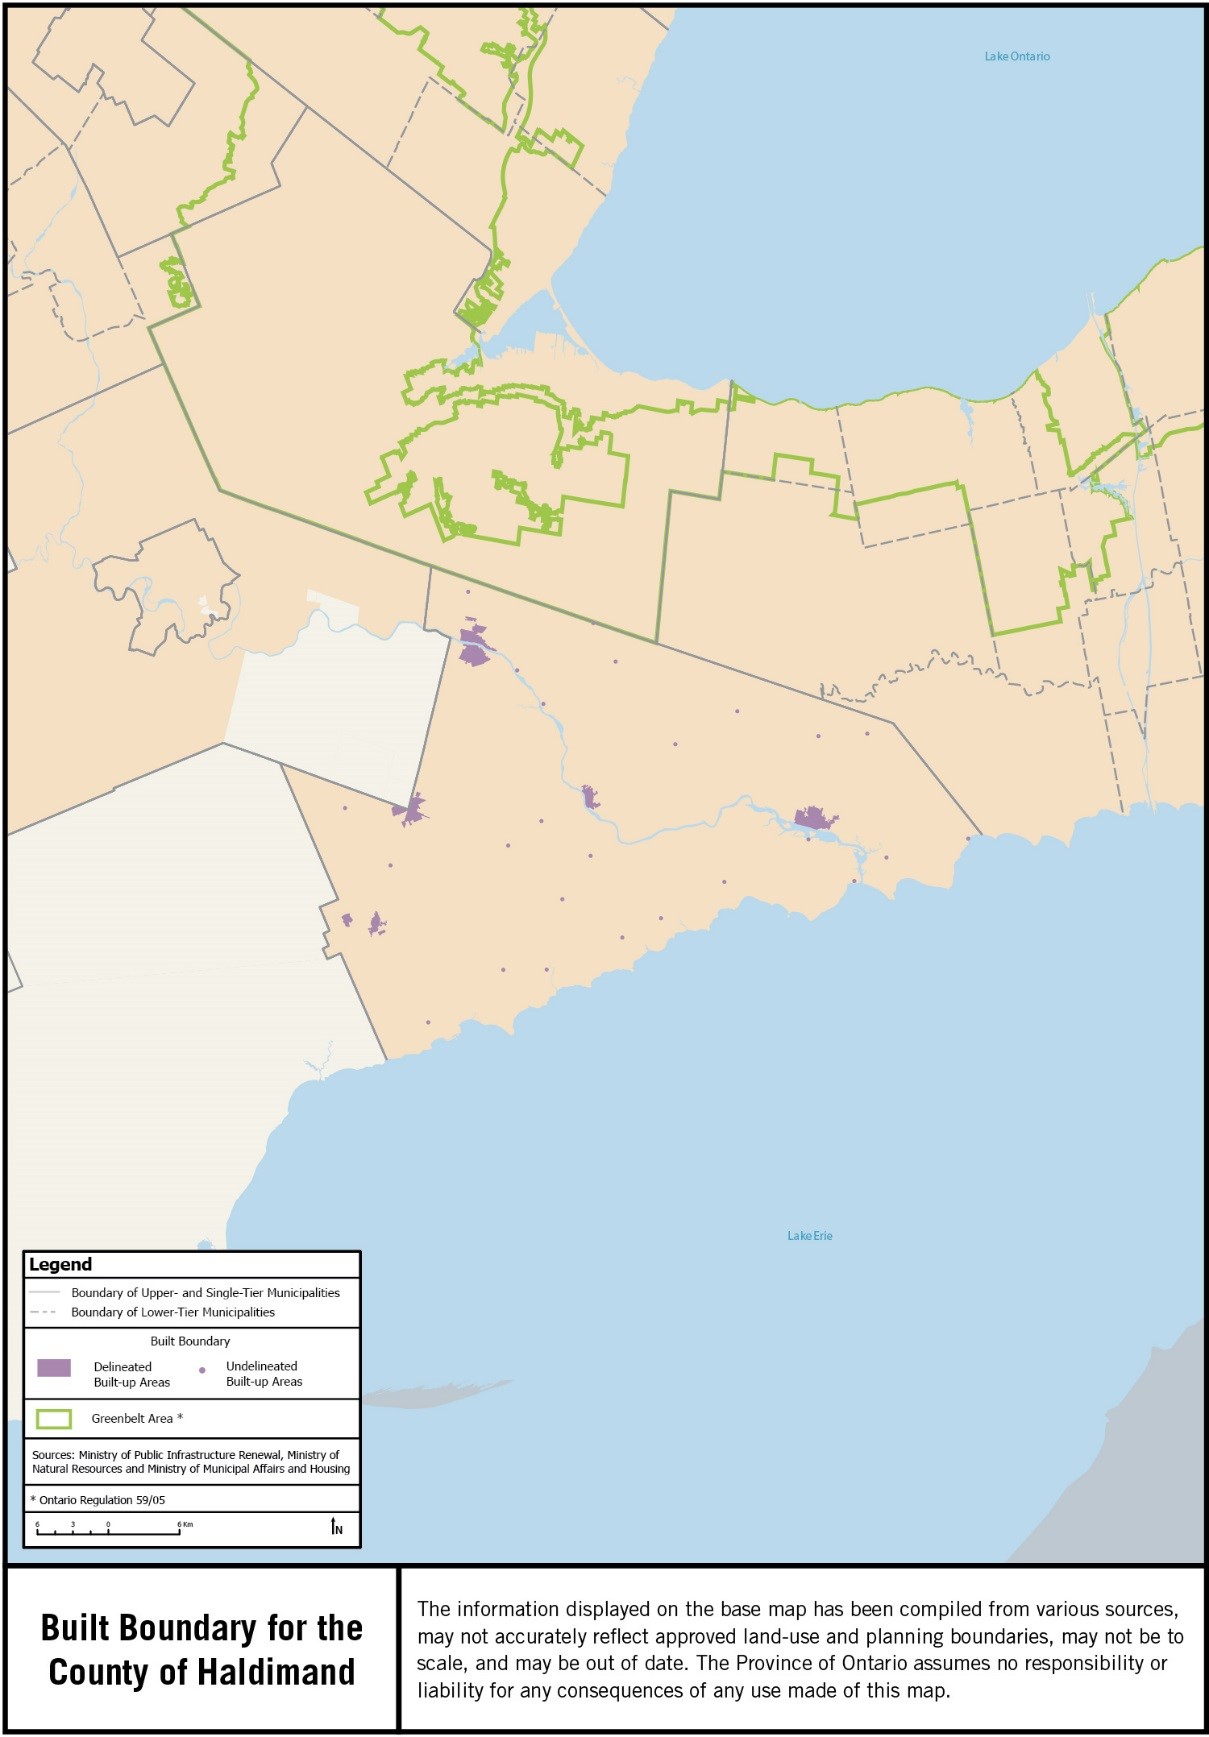 Map showing the built boundary for the County of Haldimand.